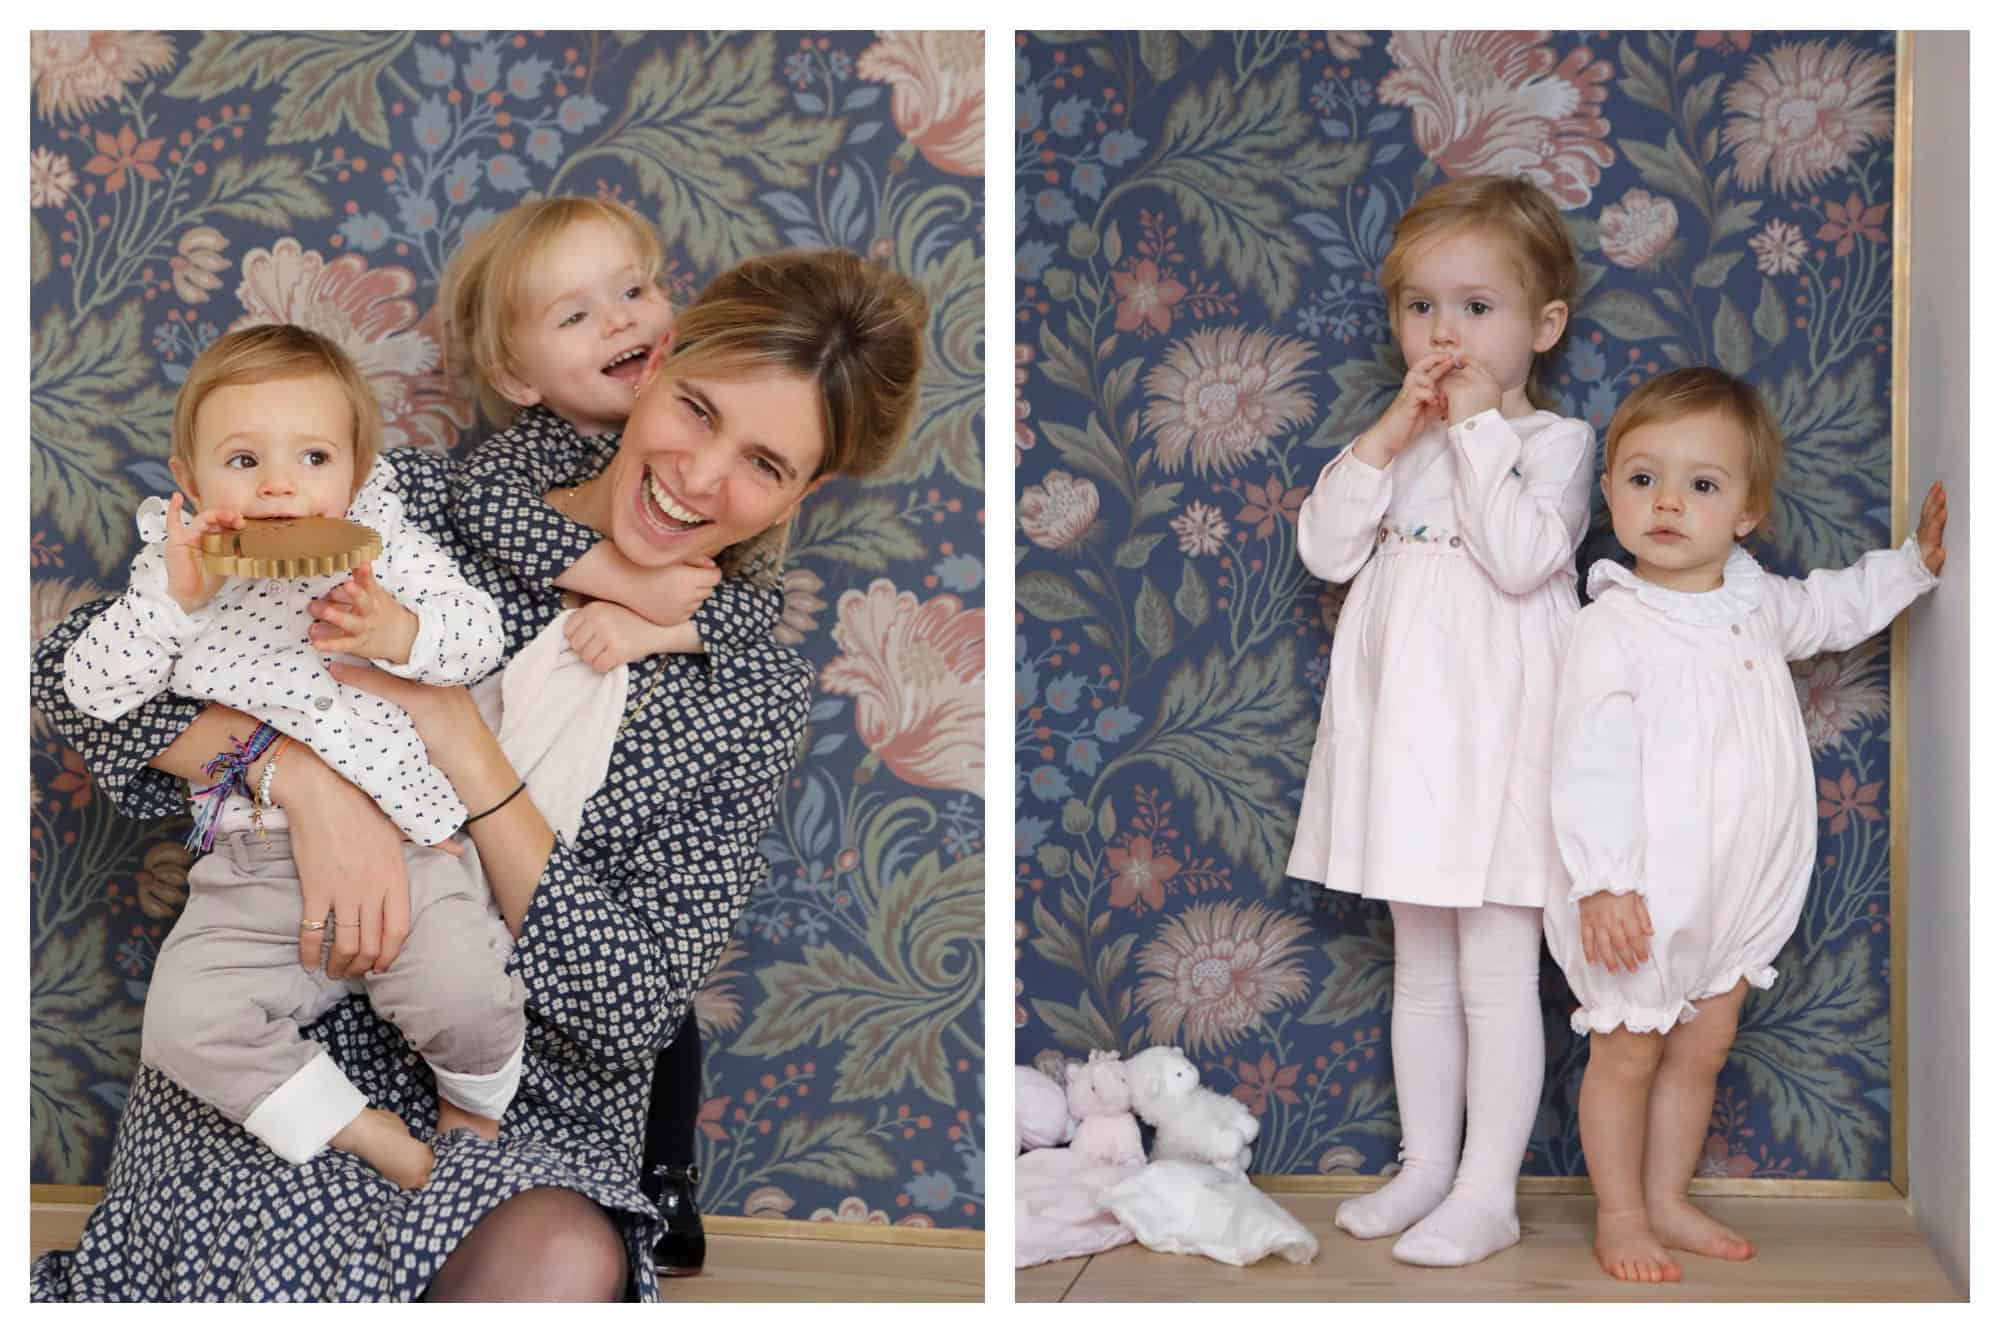 A mother laughing with her two children against a backdrop of swirling flower-print wallpaper (left). Two little girls standing in front of the same wallpaper, dressed in outfits from Tartine et Chocolat (right).